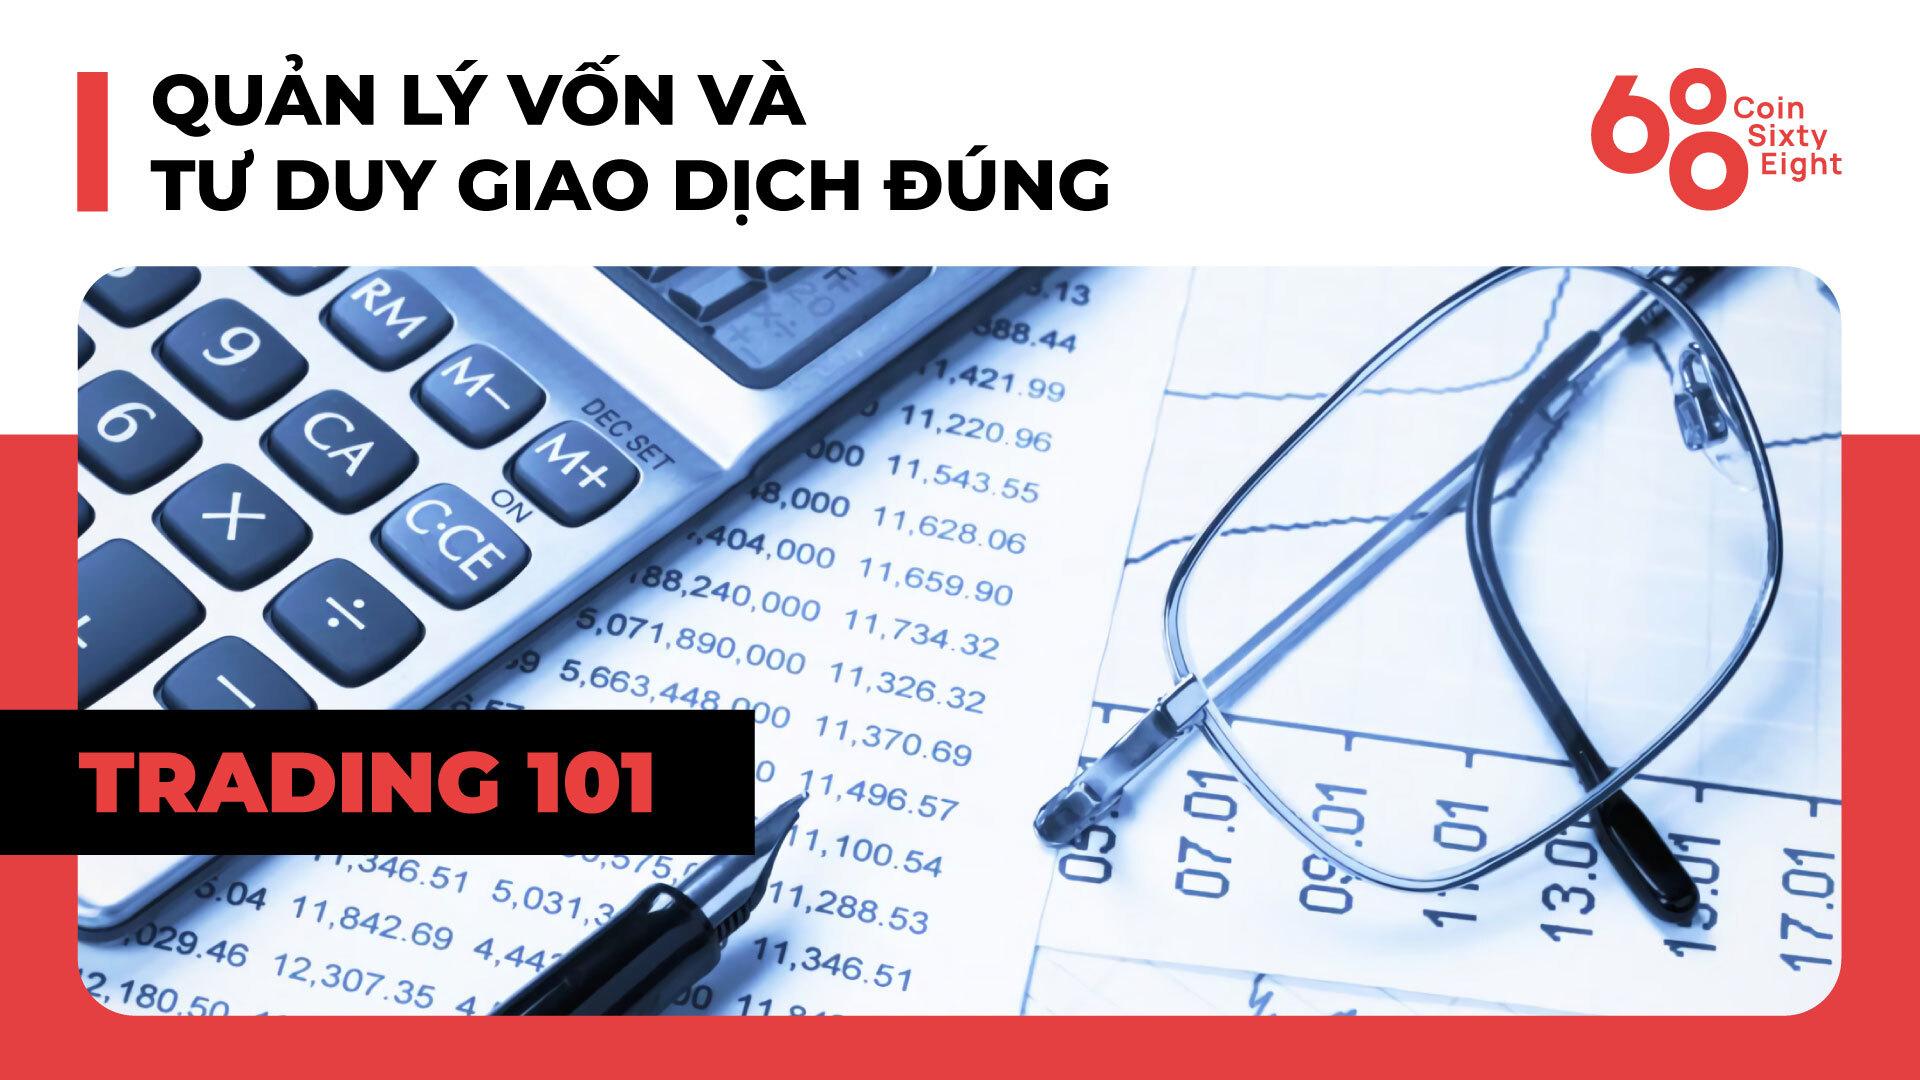 lop-giao-dich-101-price-action-trading-phan-13-quan-ly-von-va-tu-duy-giao-dich-dung